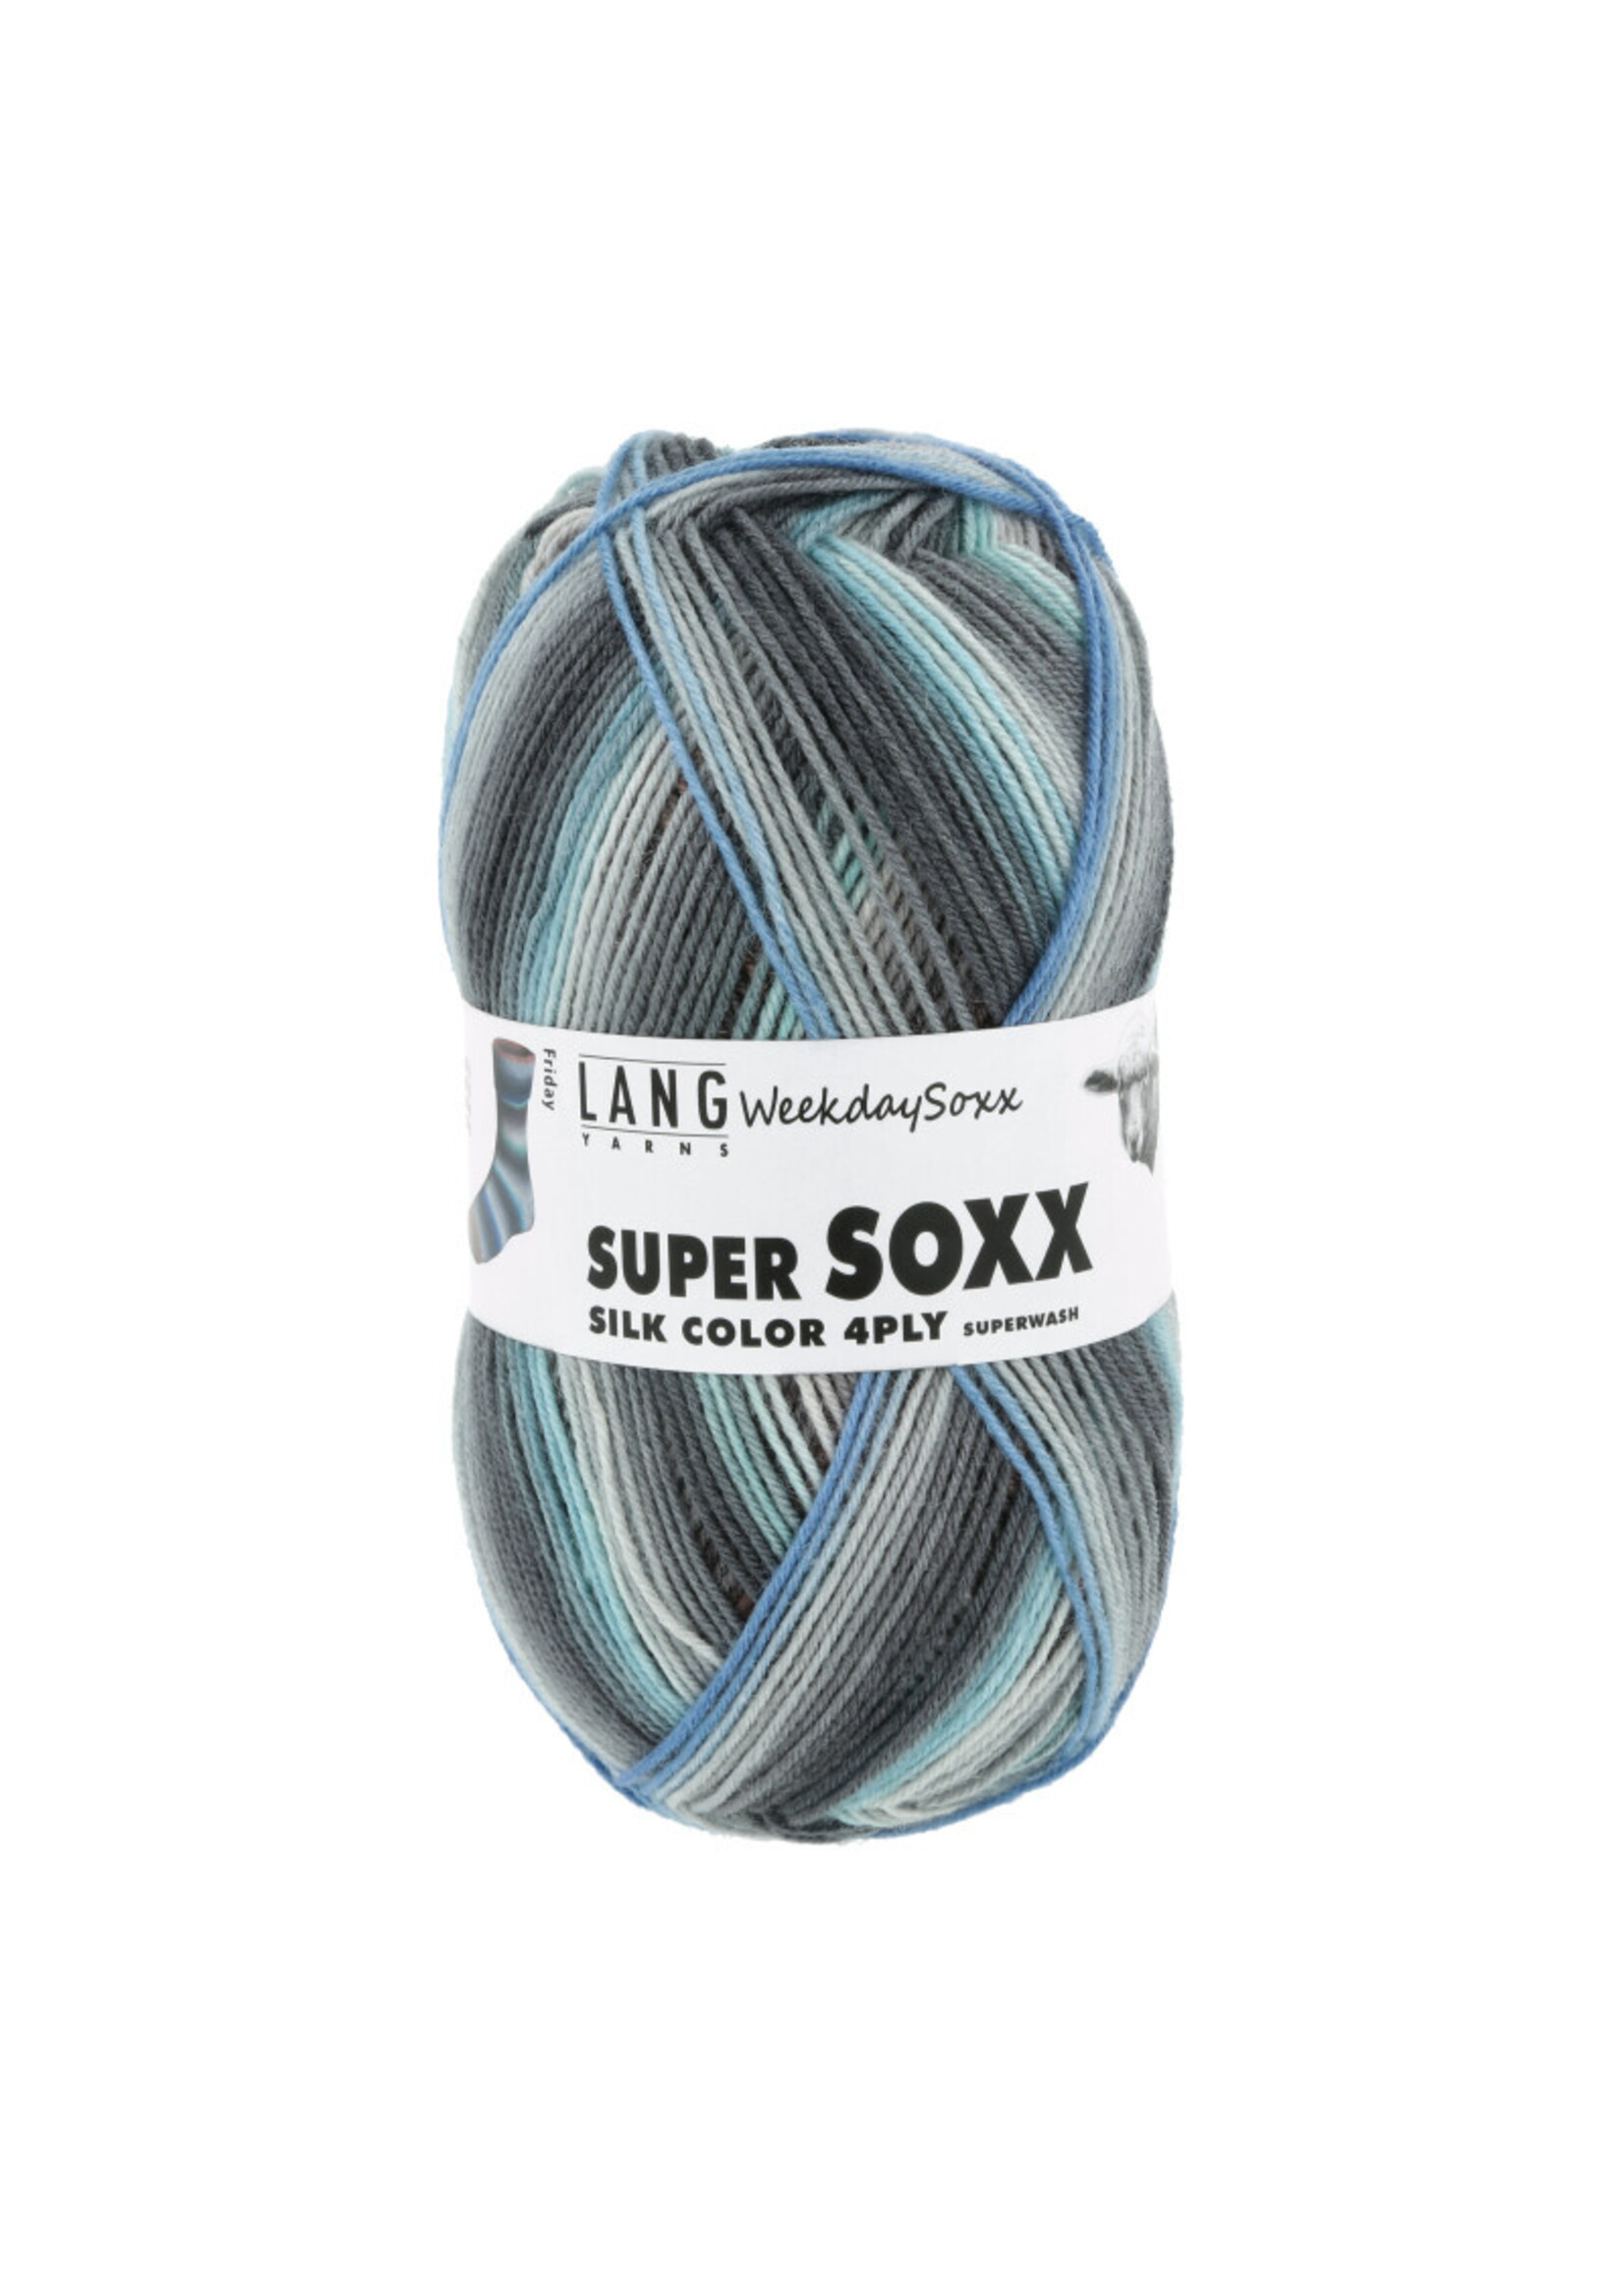 LangYarns Super Soxx Silk Color 4ply - 0467 turquoise/blue Friday